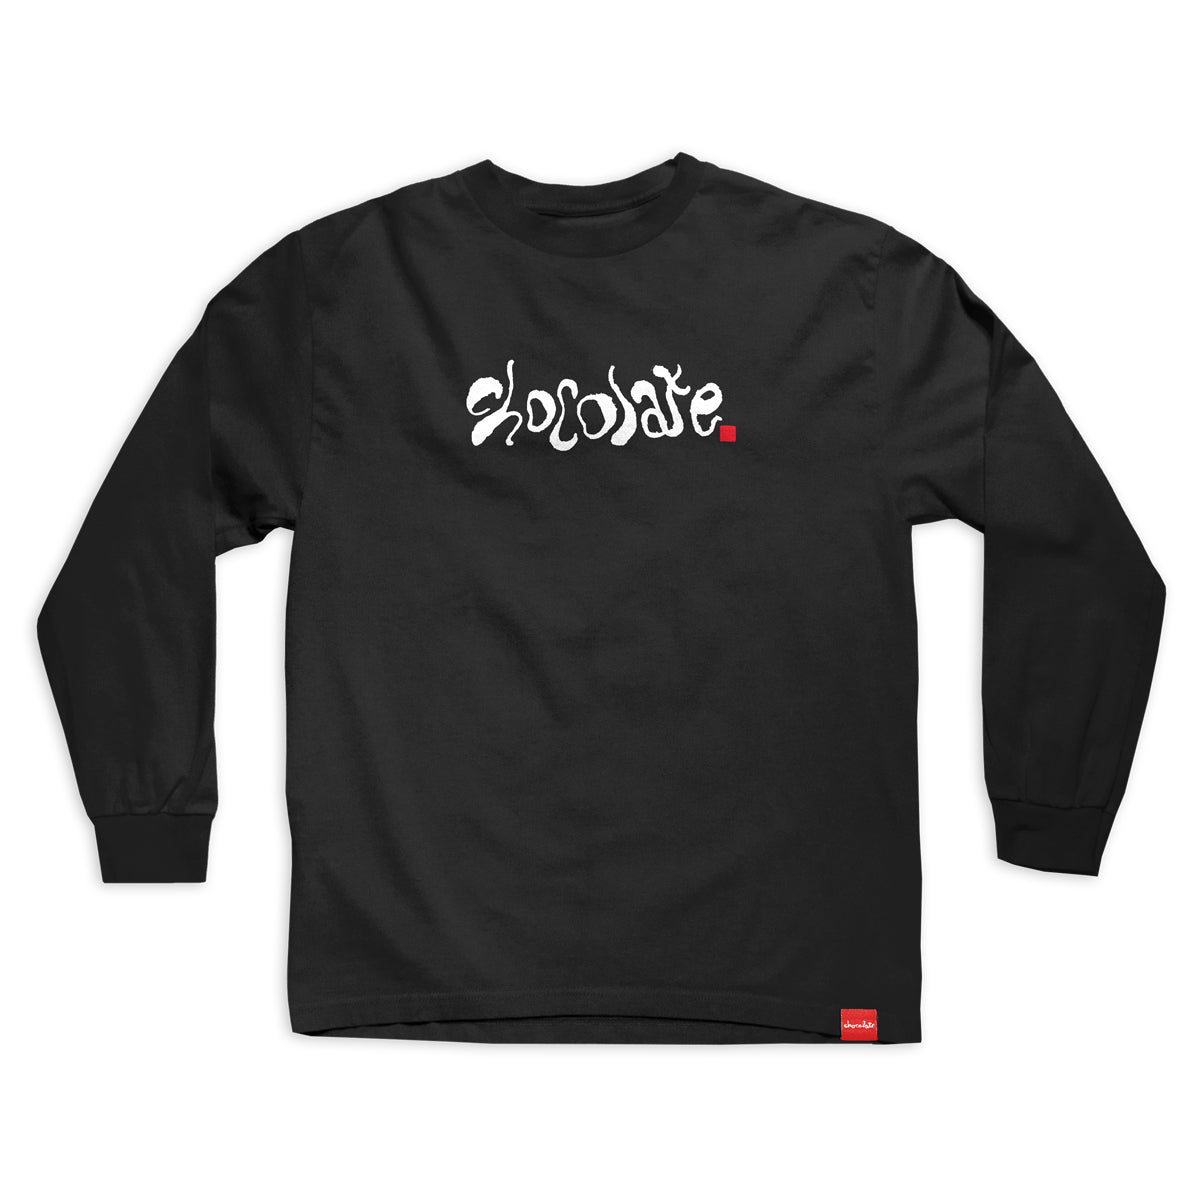 Melted Youth L/S Tee